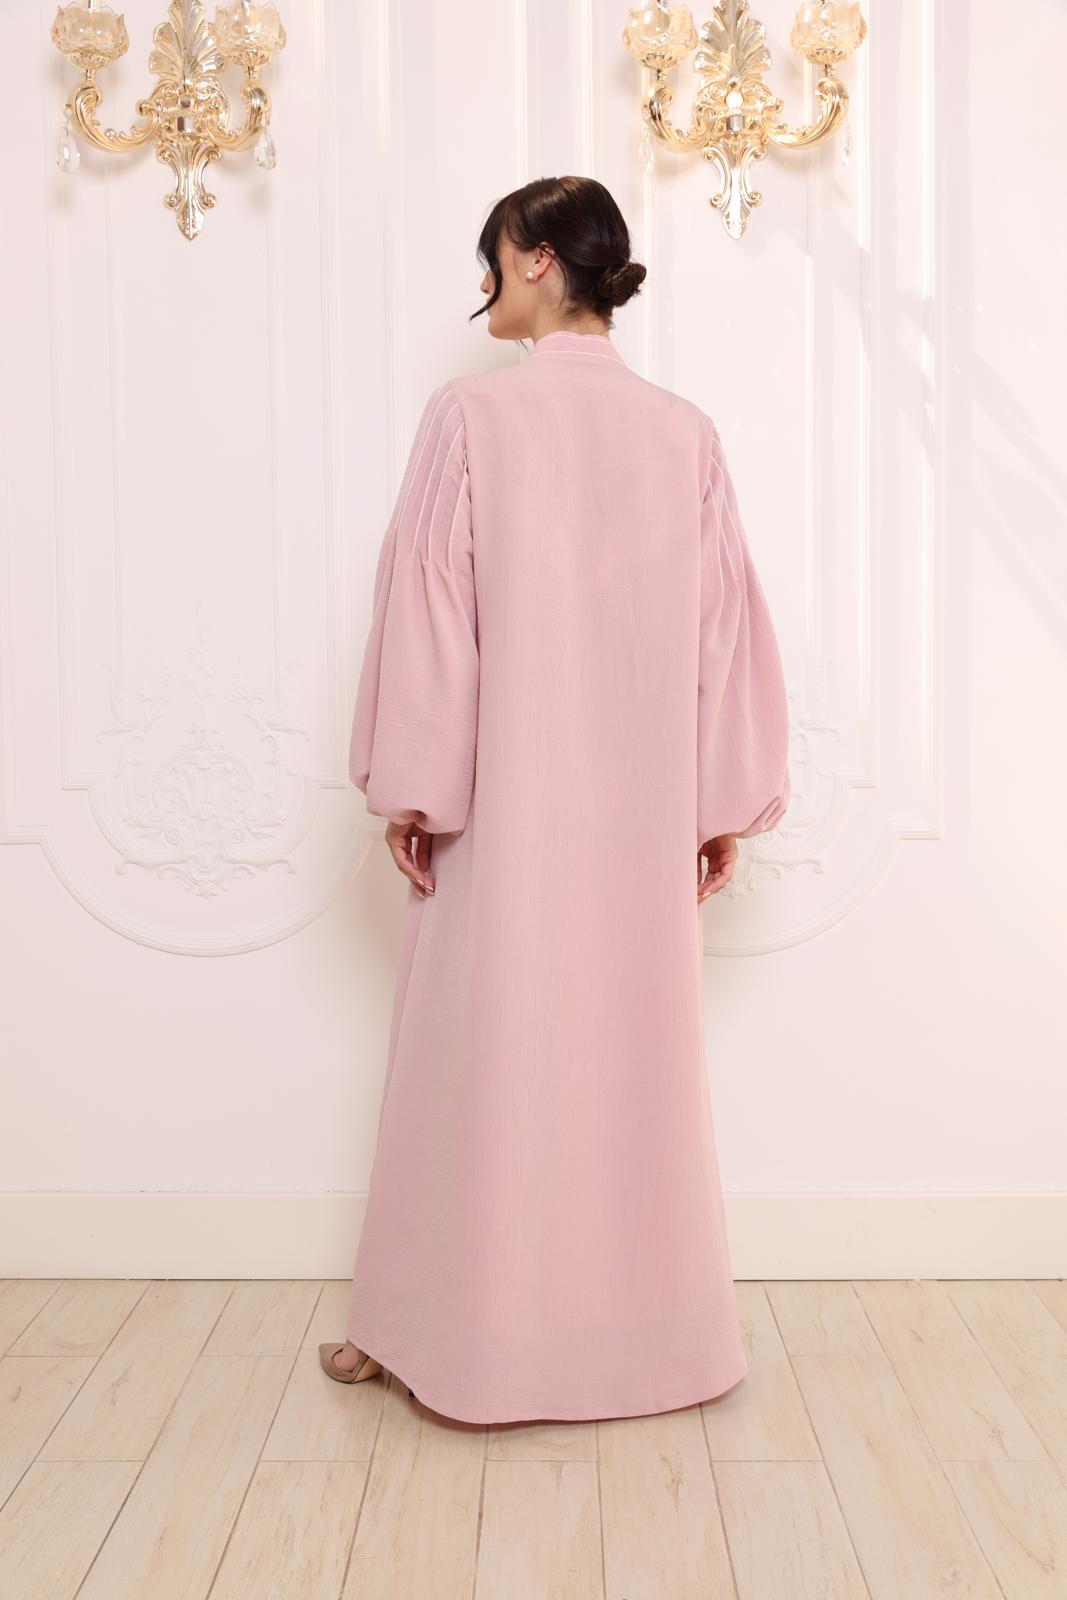 This chic Abaya is perfect everyday piece.